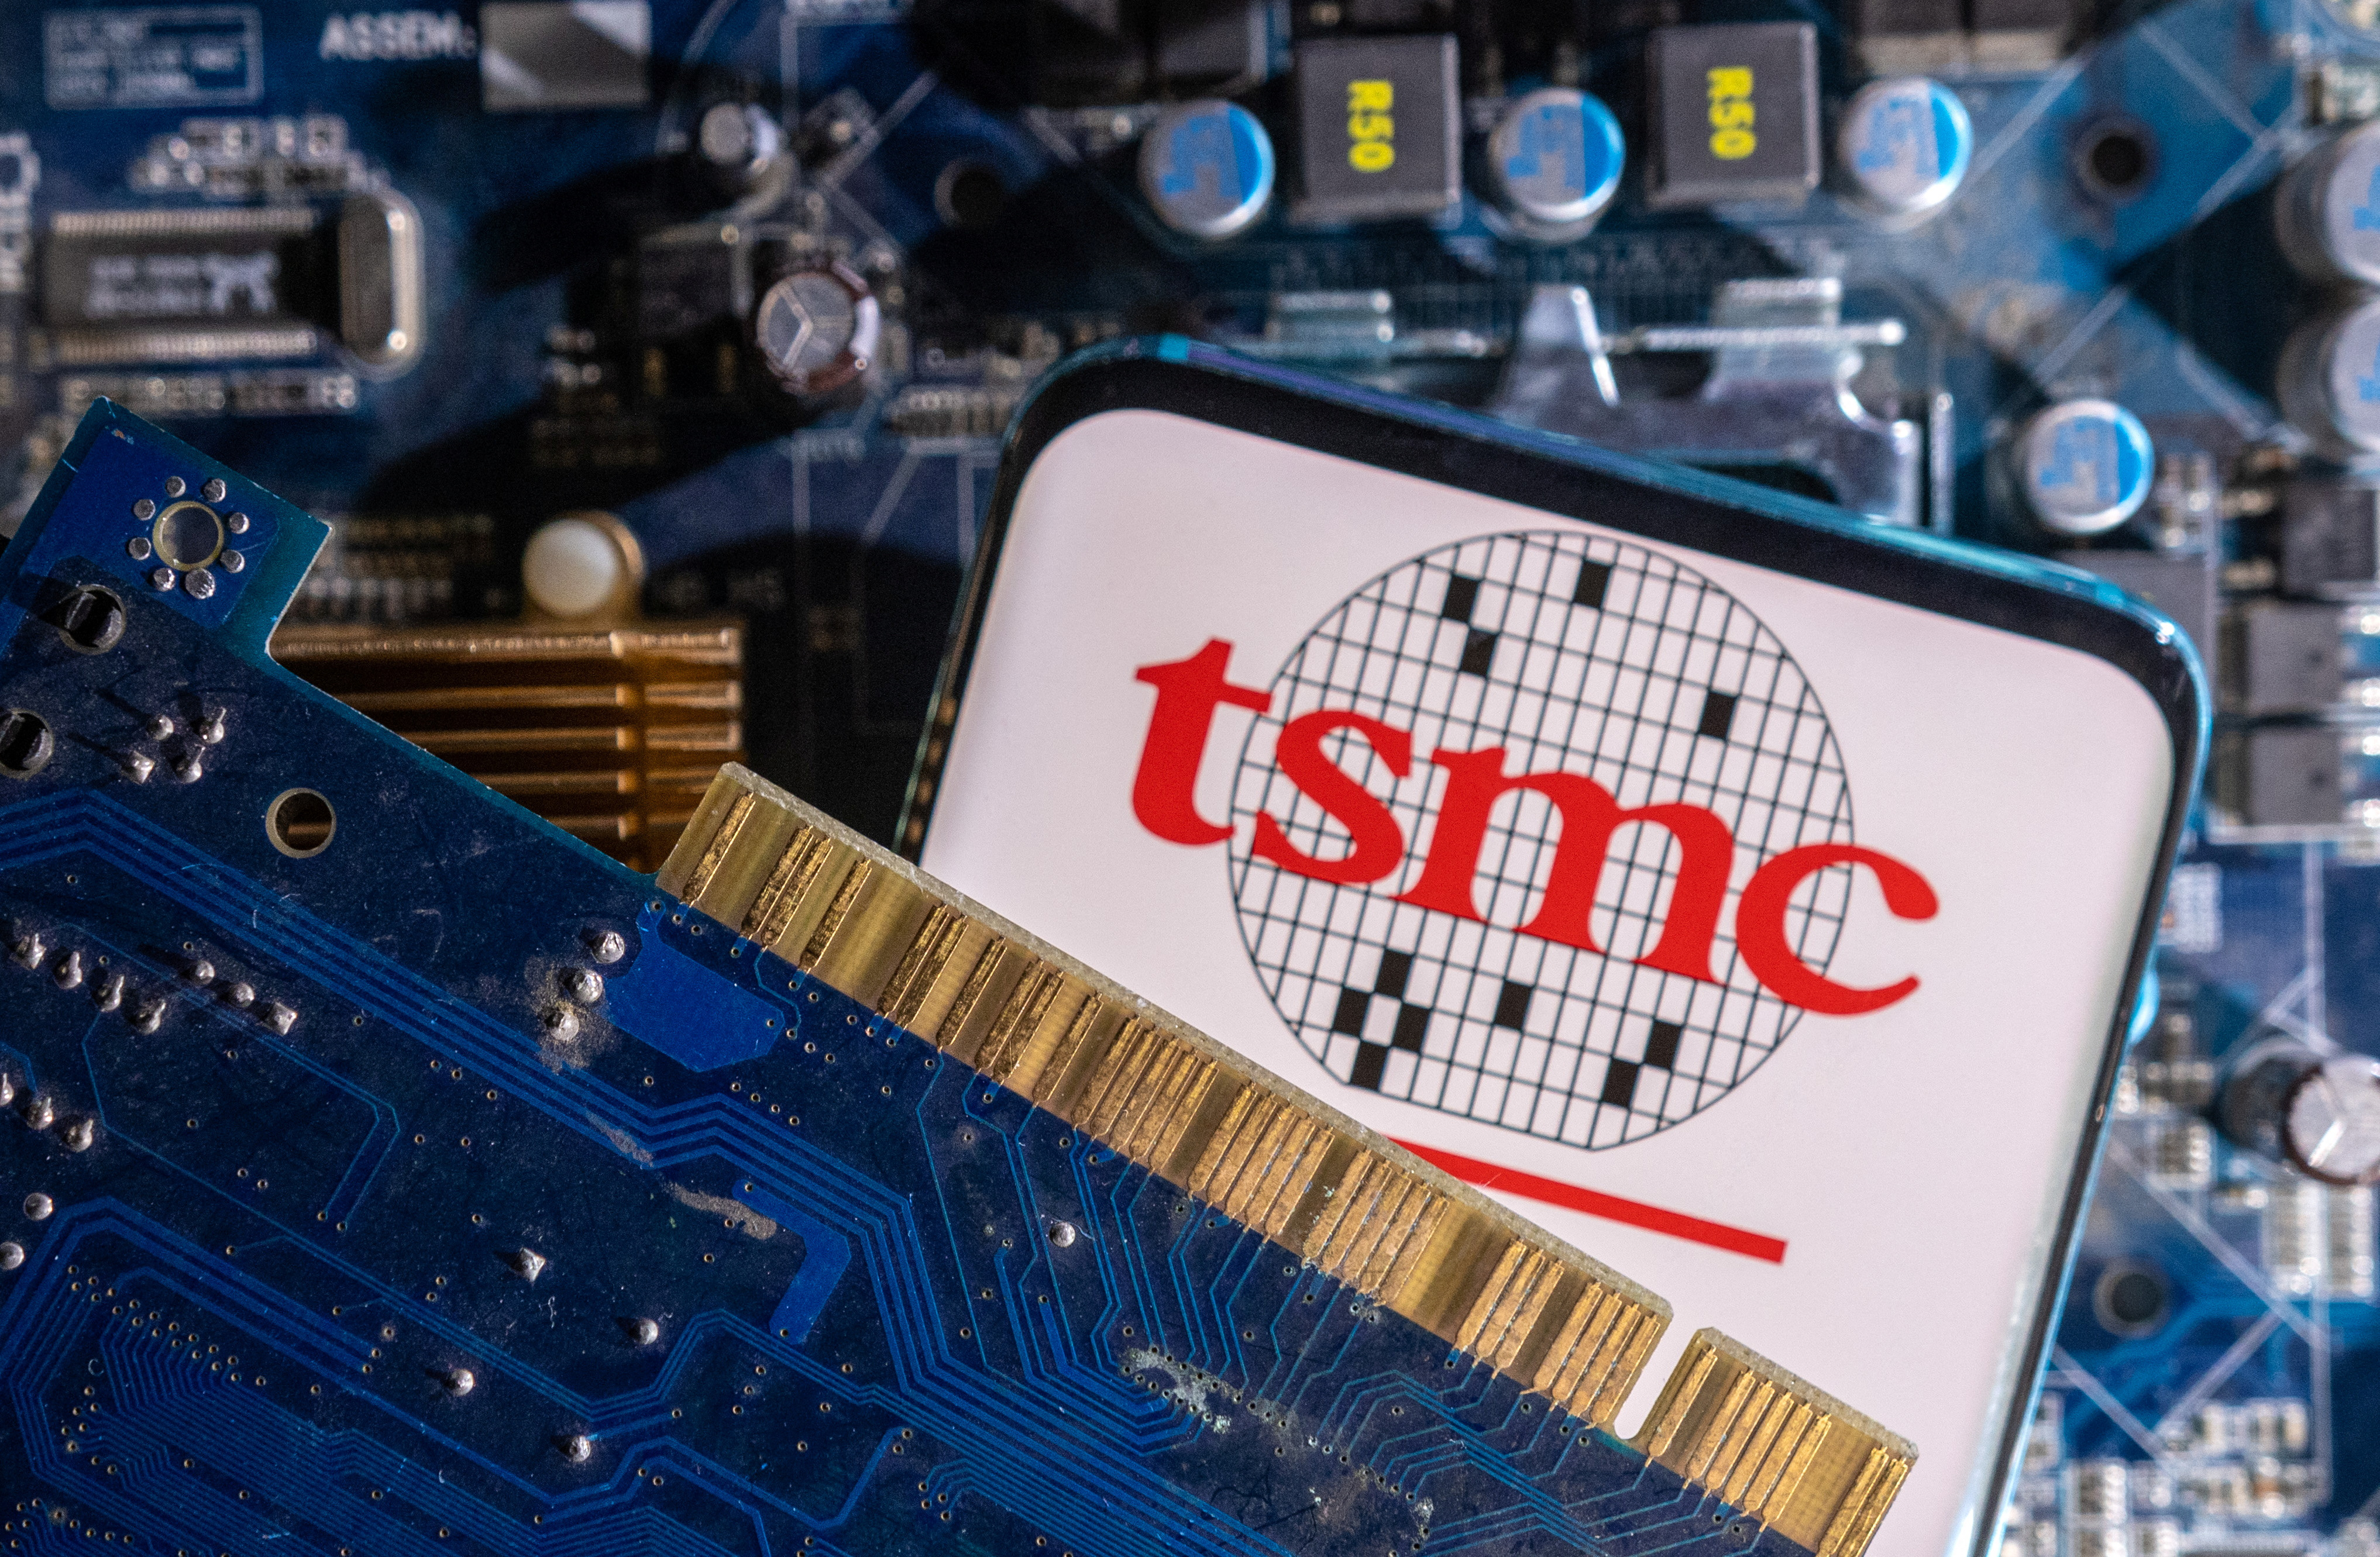 The multinational Taiwan Semiconductor Manufacturing Corporation (TSMC) is the most valuable semiconductor company in the world (REUTERS/Dado Ruvic/Illustration)